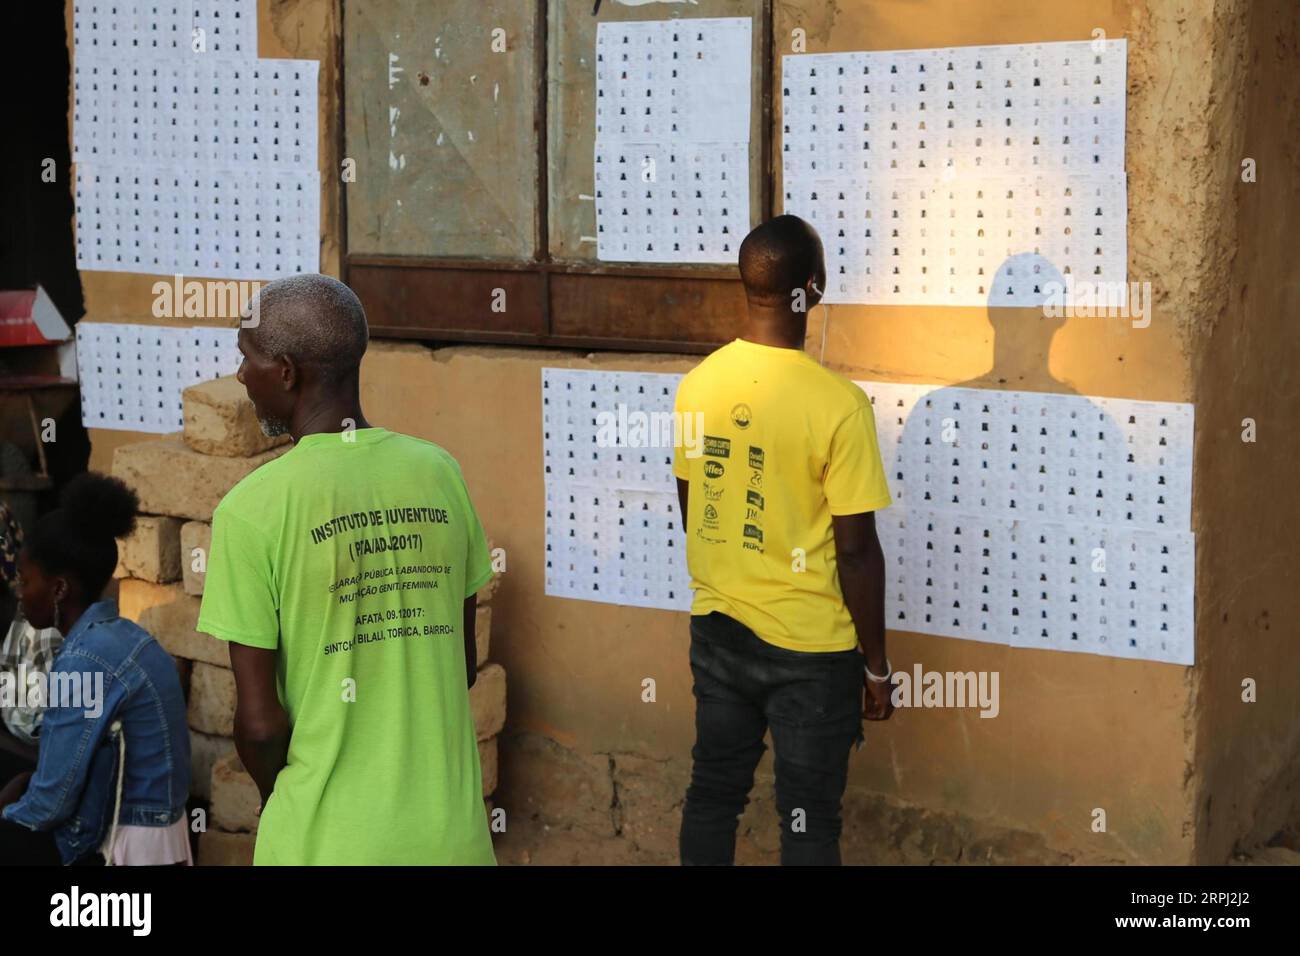 191124 -- BISSAU, Nov. 24, 2019 -- A voter looks for his name at a polling station in Bissau, capital of Guinea-Bissau, on Nov. 24, 2019. Guinea-Bissau s presidential election kicked off Sunday with 12 candidates competing to become the west African country s president for the next five years.  GUINEA-BISSAU-BISSAU-PRESIDENTIAL ELECTION XingxJianqiao PUBLICATIONxNOTxINxCHN Stock Photo